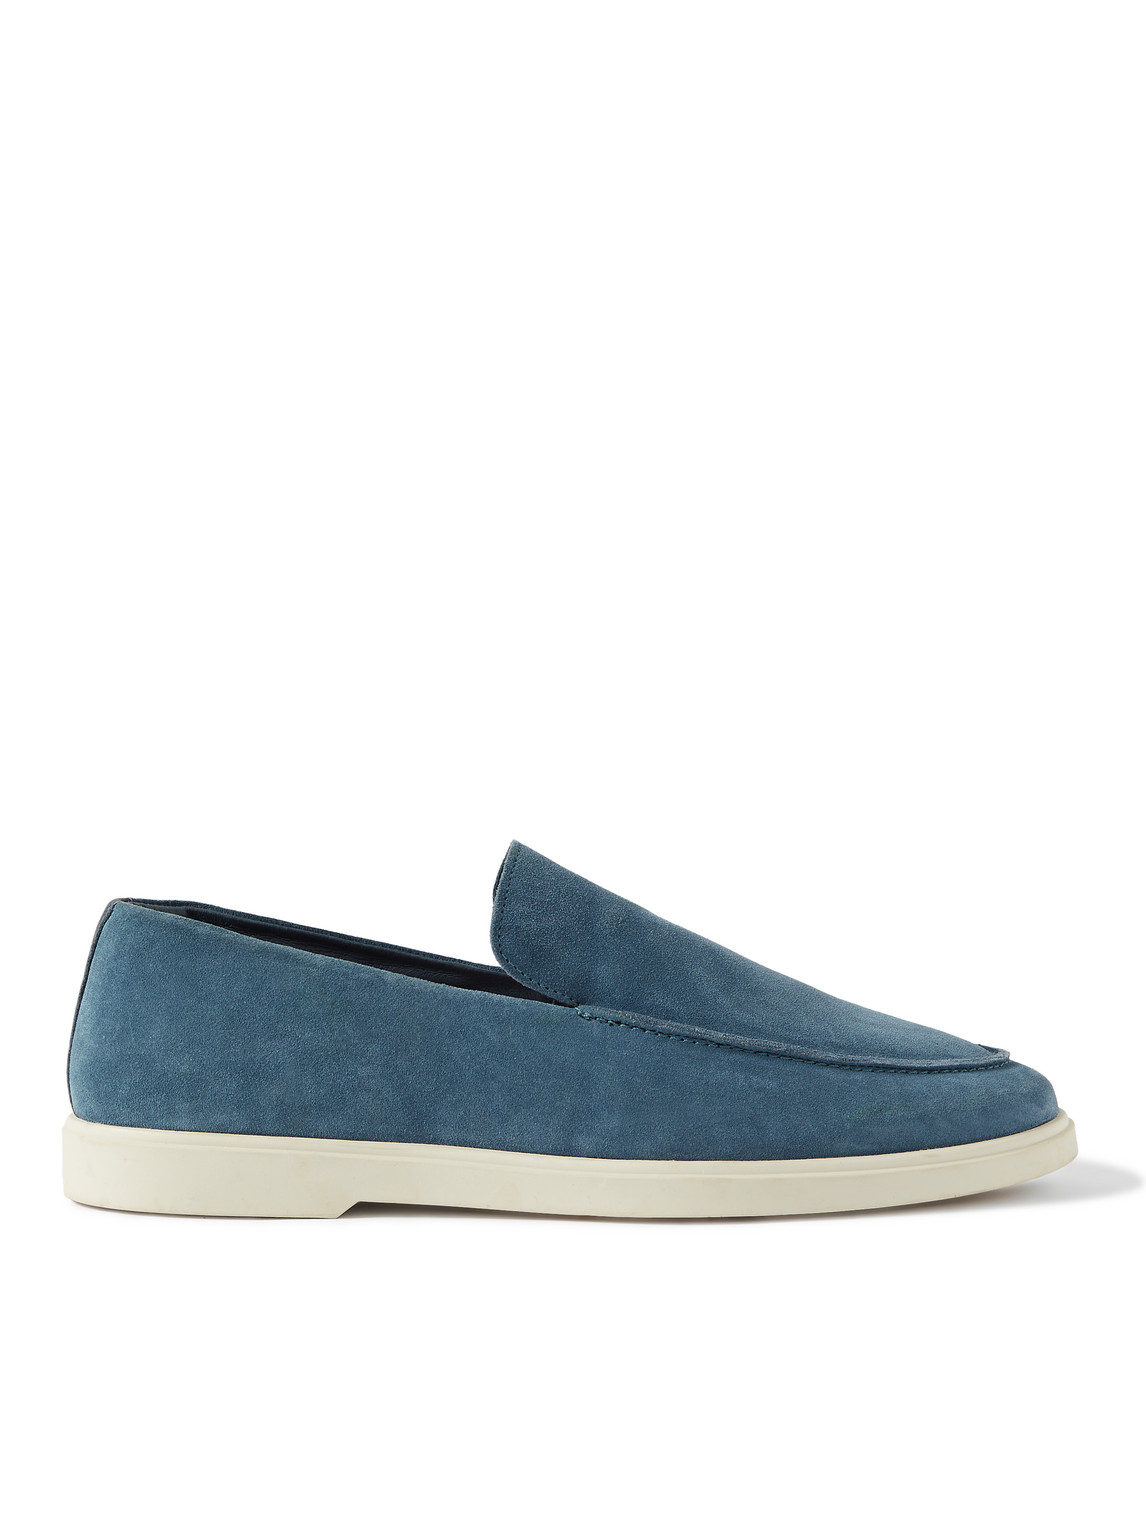 FRESCOBOL CARIOCA MIGUEL LEATHER-TRIMMED SUEDE LOAFERS